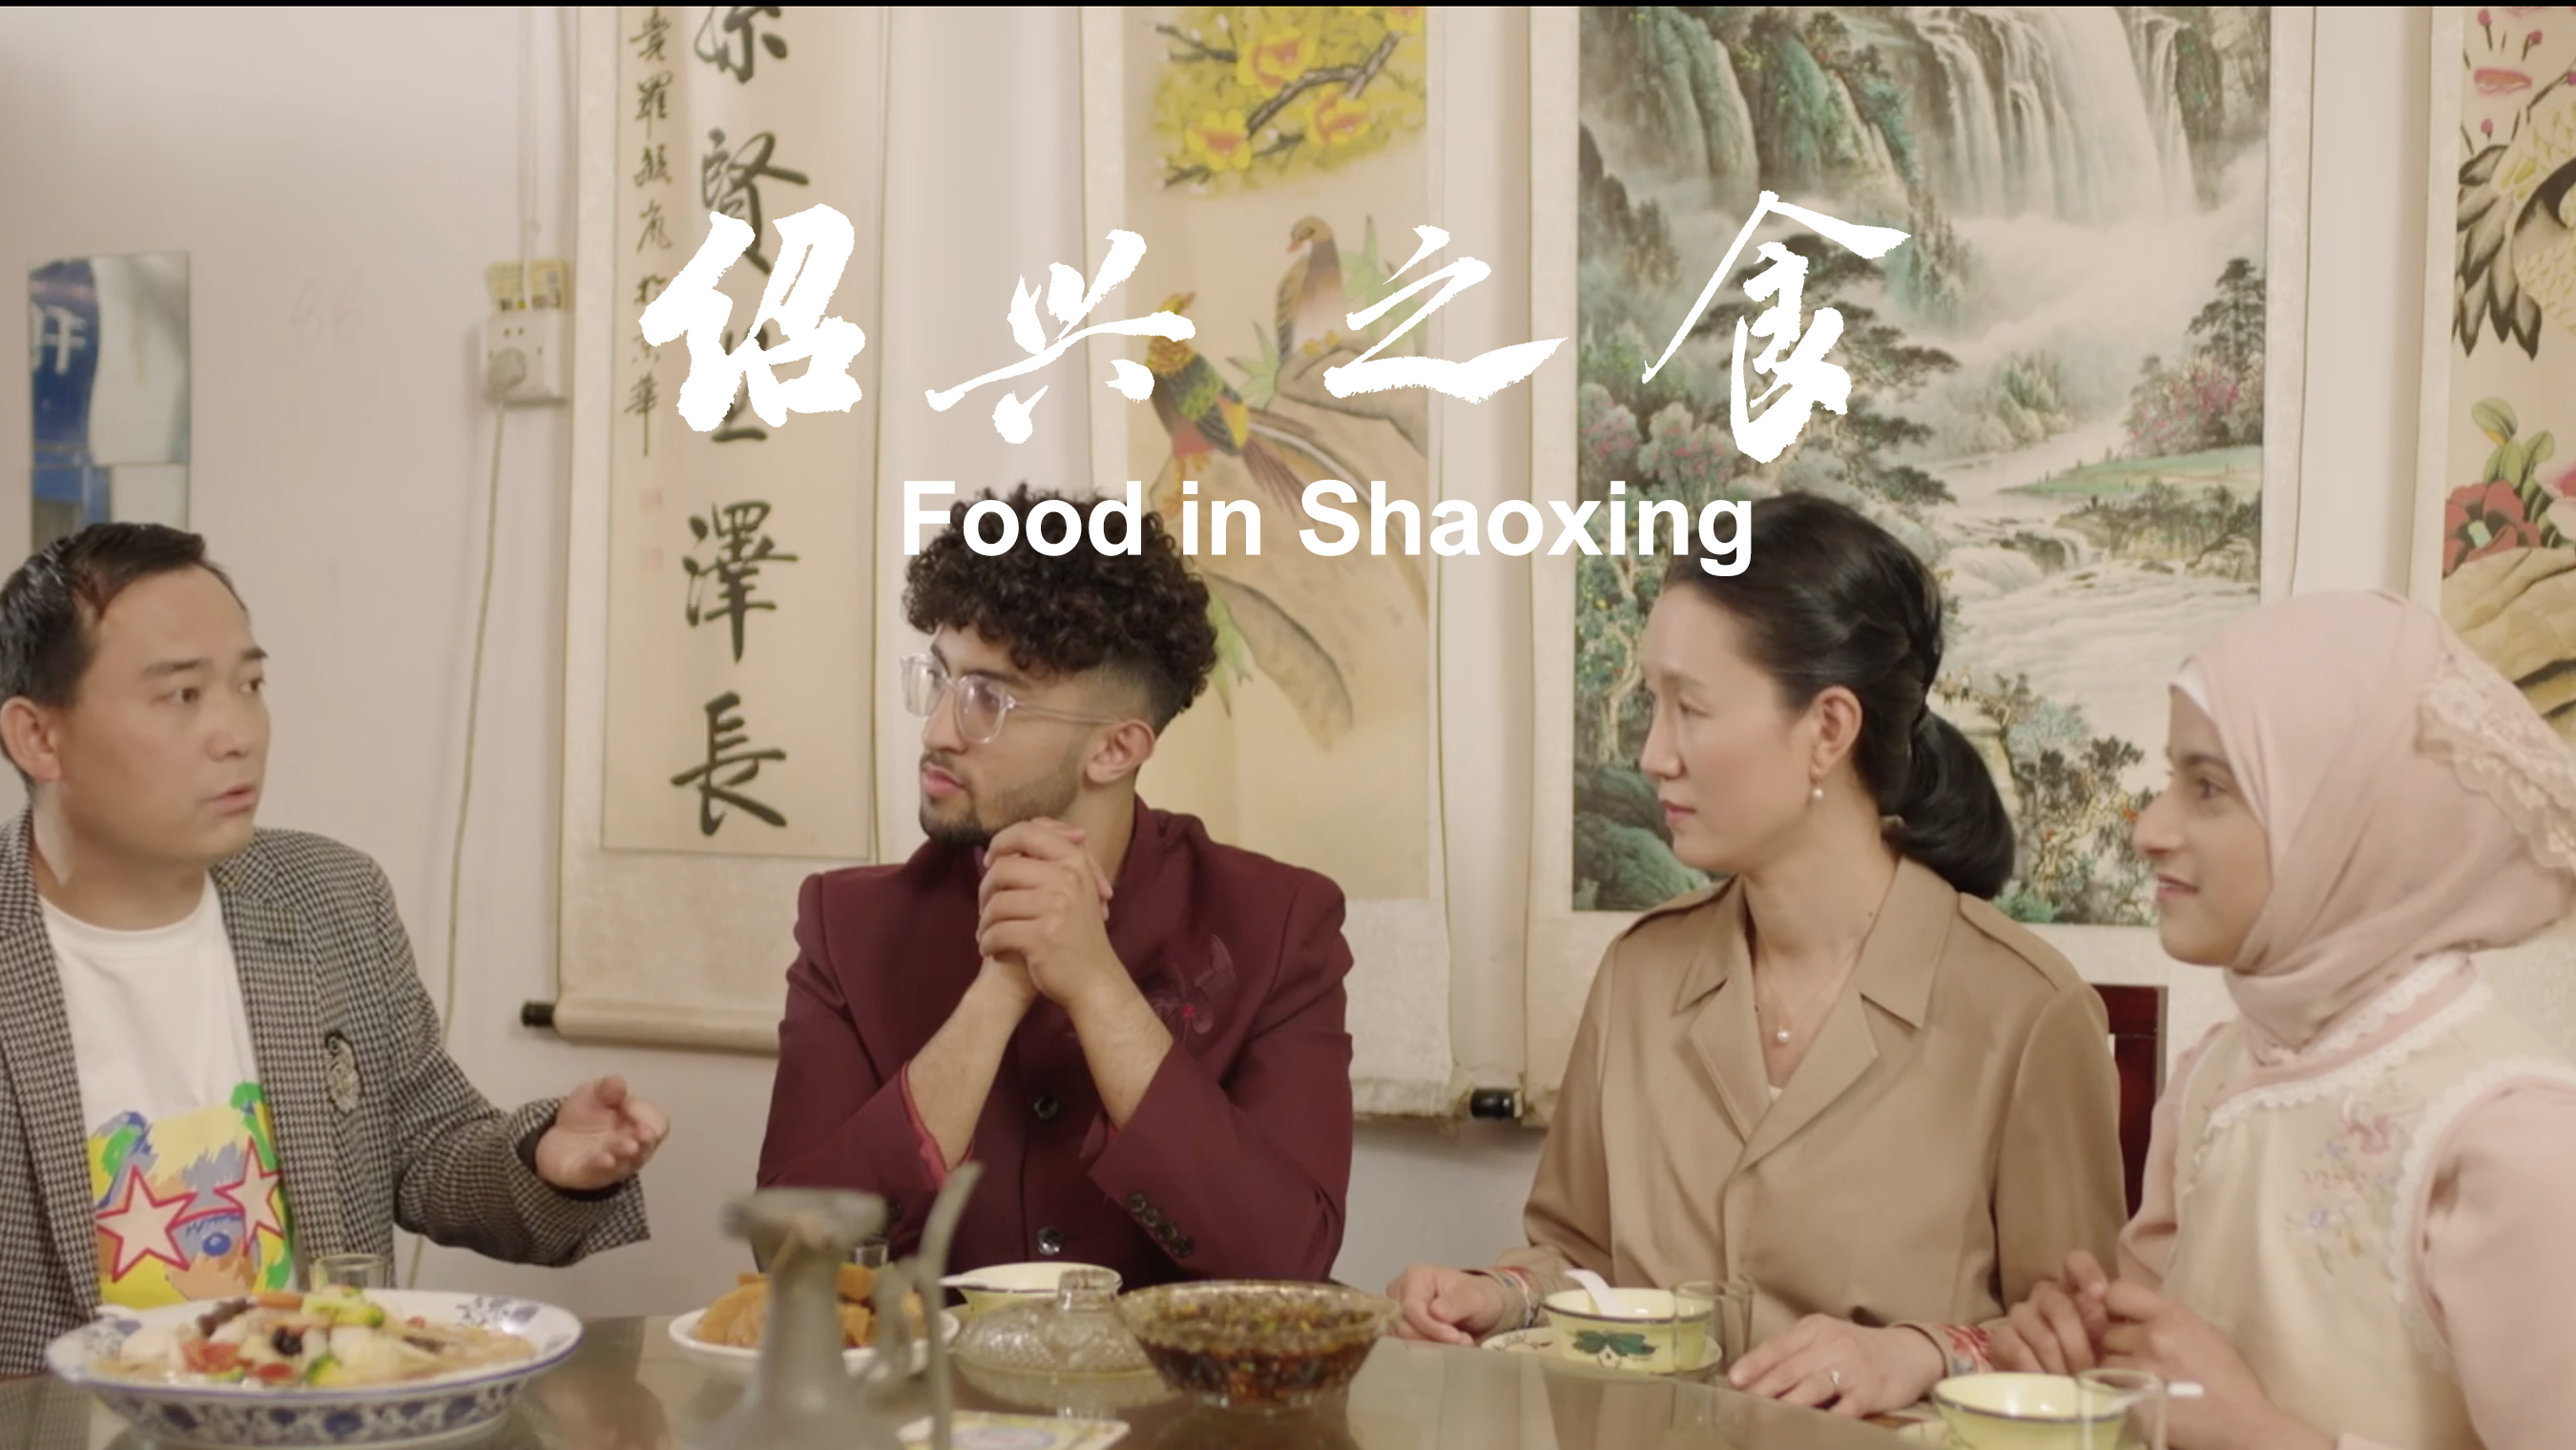 Food in Shaoxing